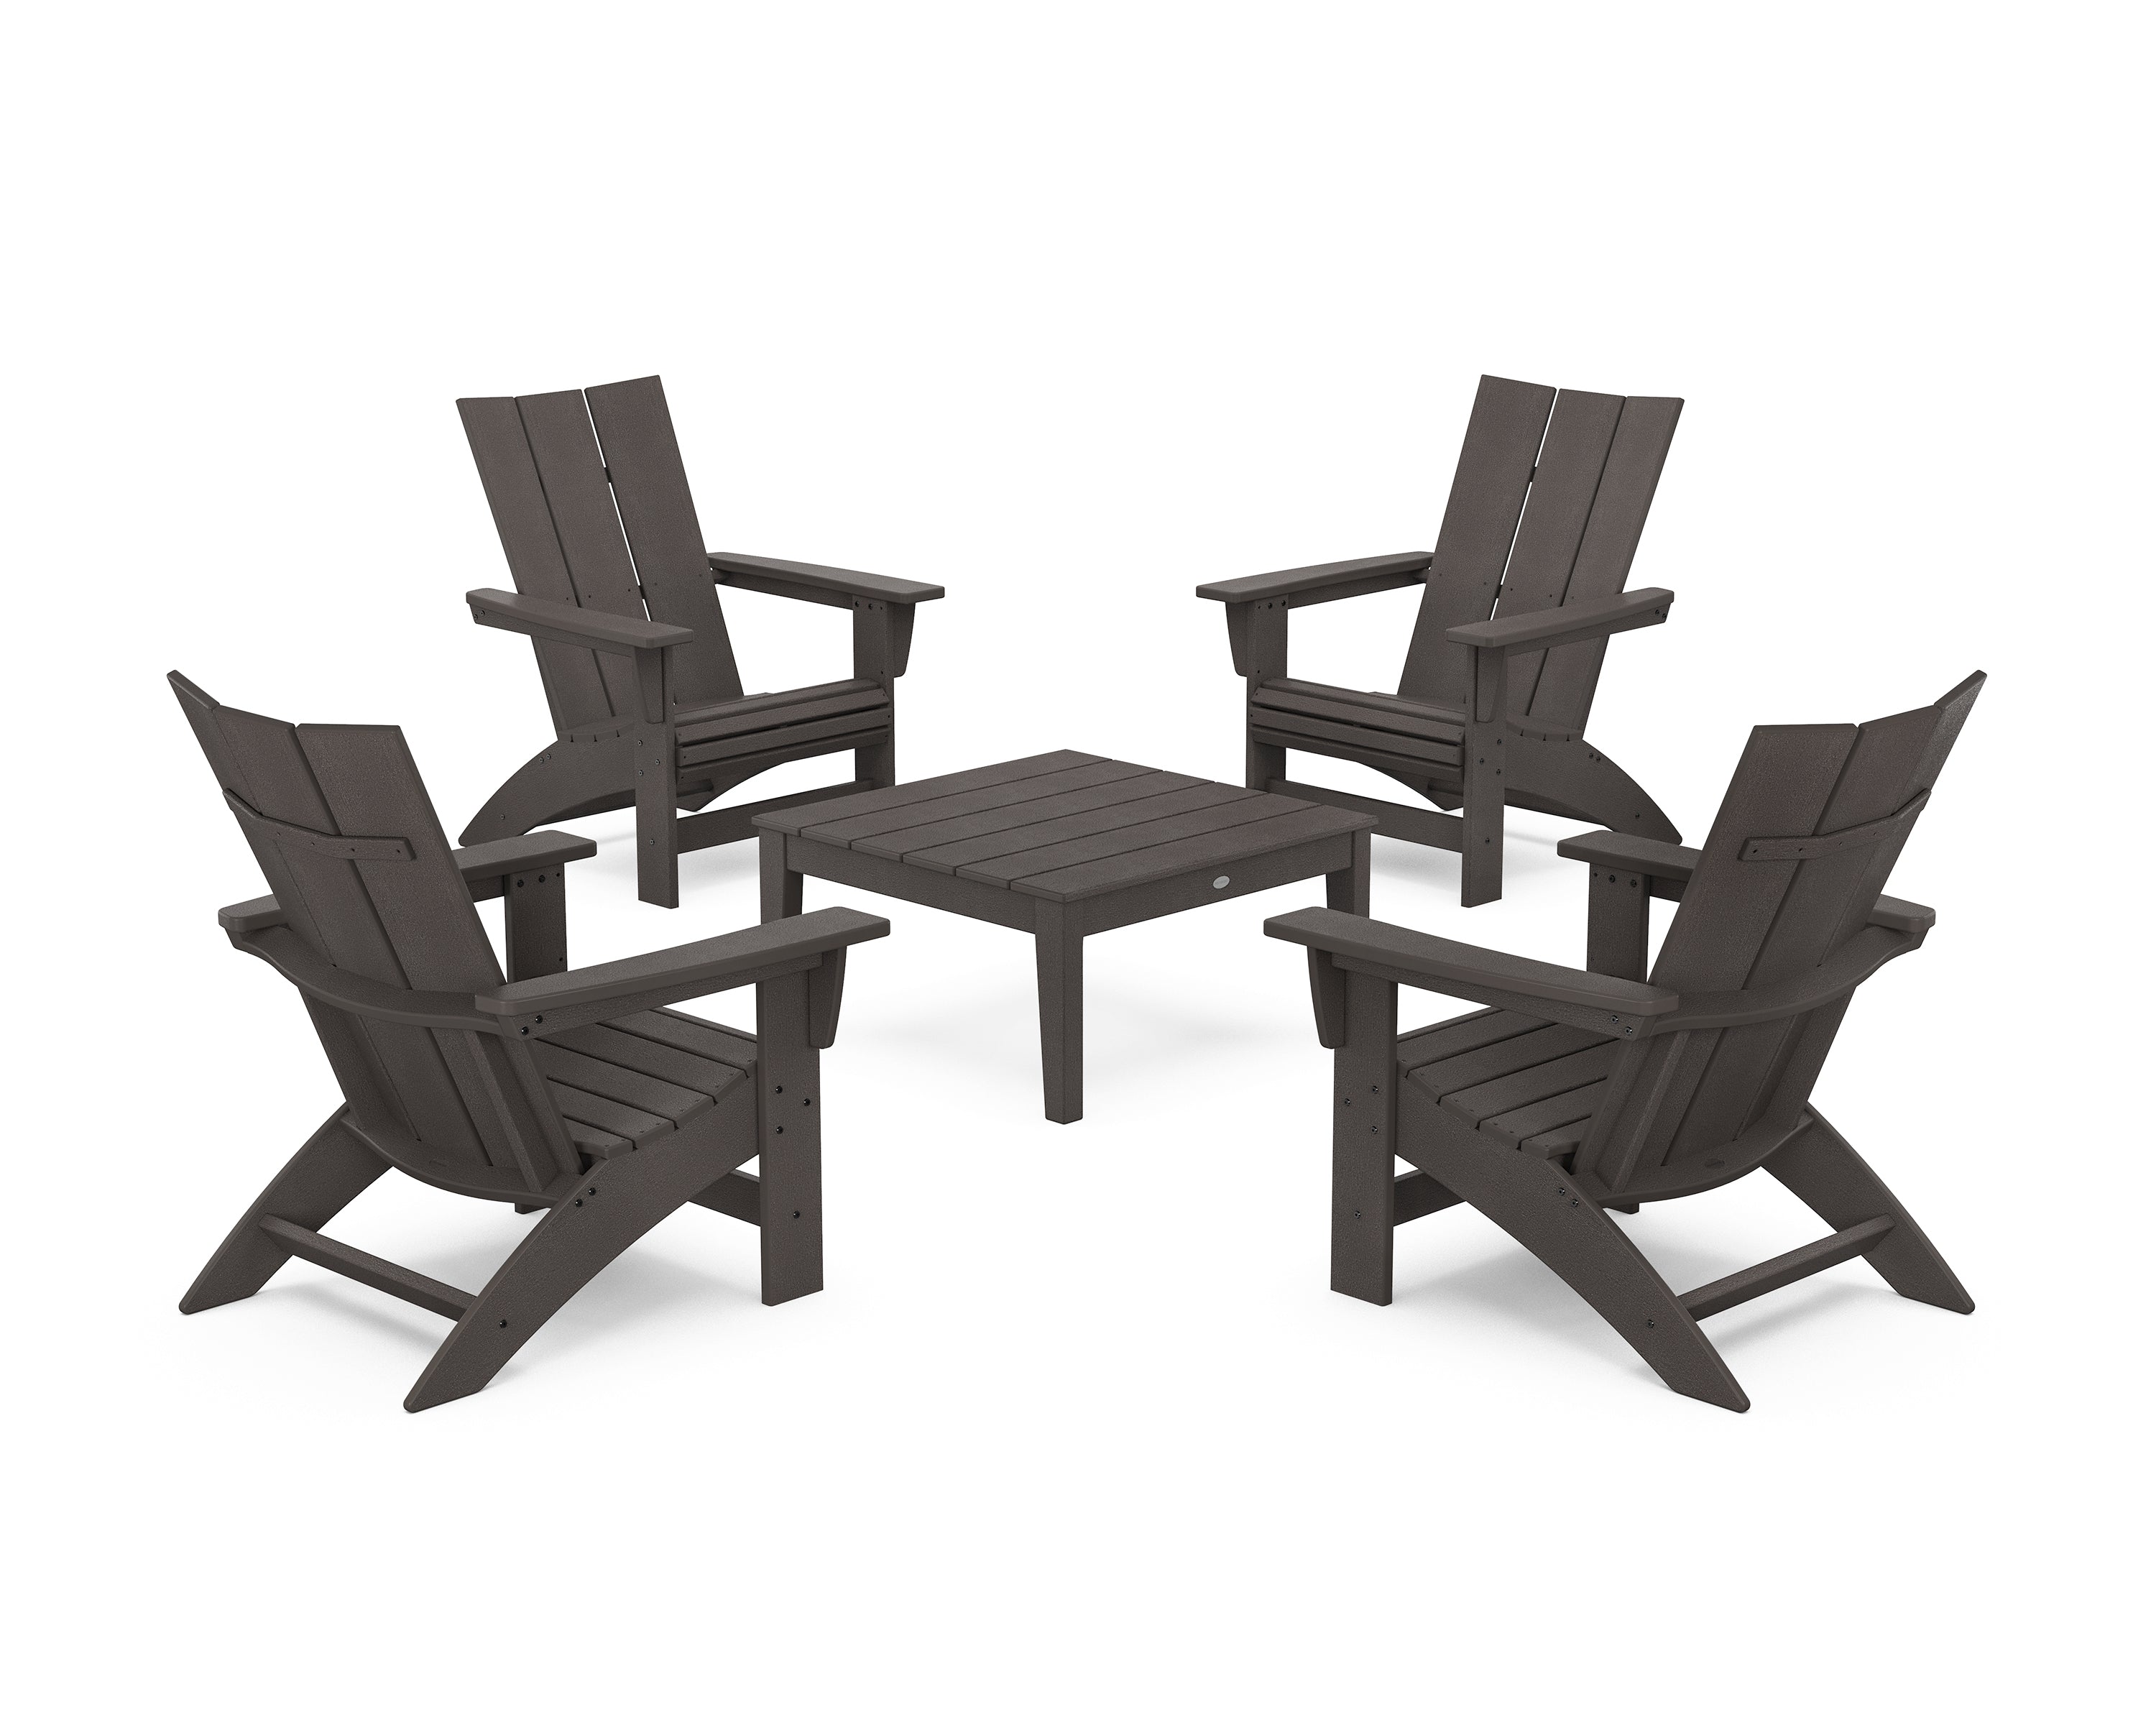 POLYWOOD® 5-Piece Modern Grand Adirondack Chair Conversation Group in Vintage Coffee